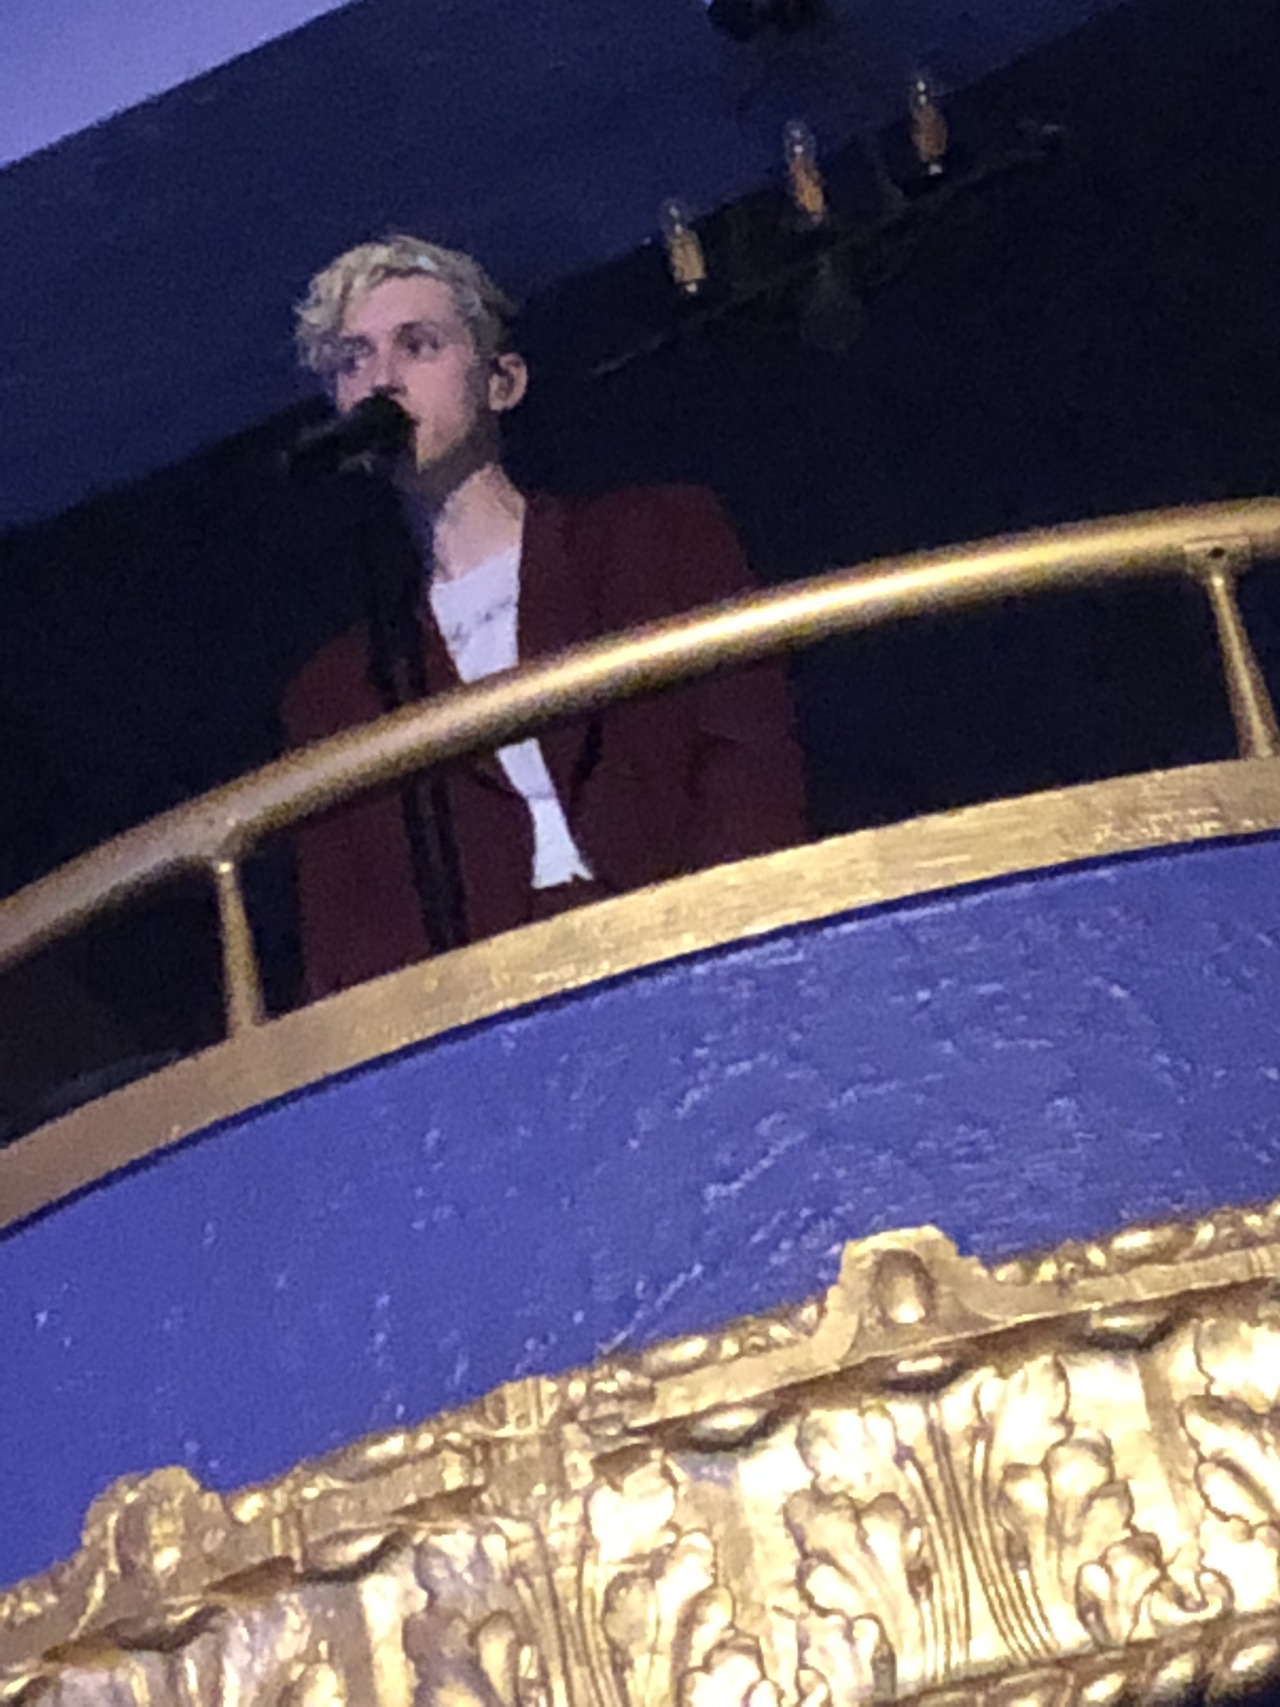 Throwback to October 2018 when I saw my Troyeboy in concert for the first time and just about passed out. He surprised us by performing his first song on the balcony behind us. Mama Laurelle was there too and it really took me back to the days of...